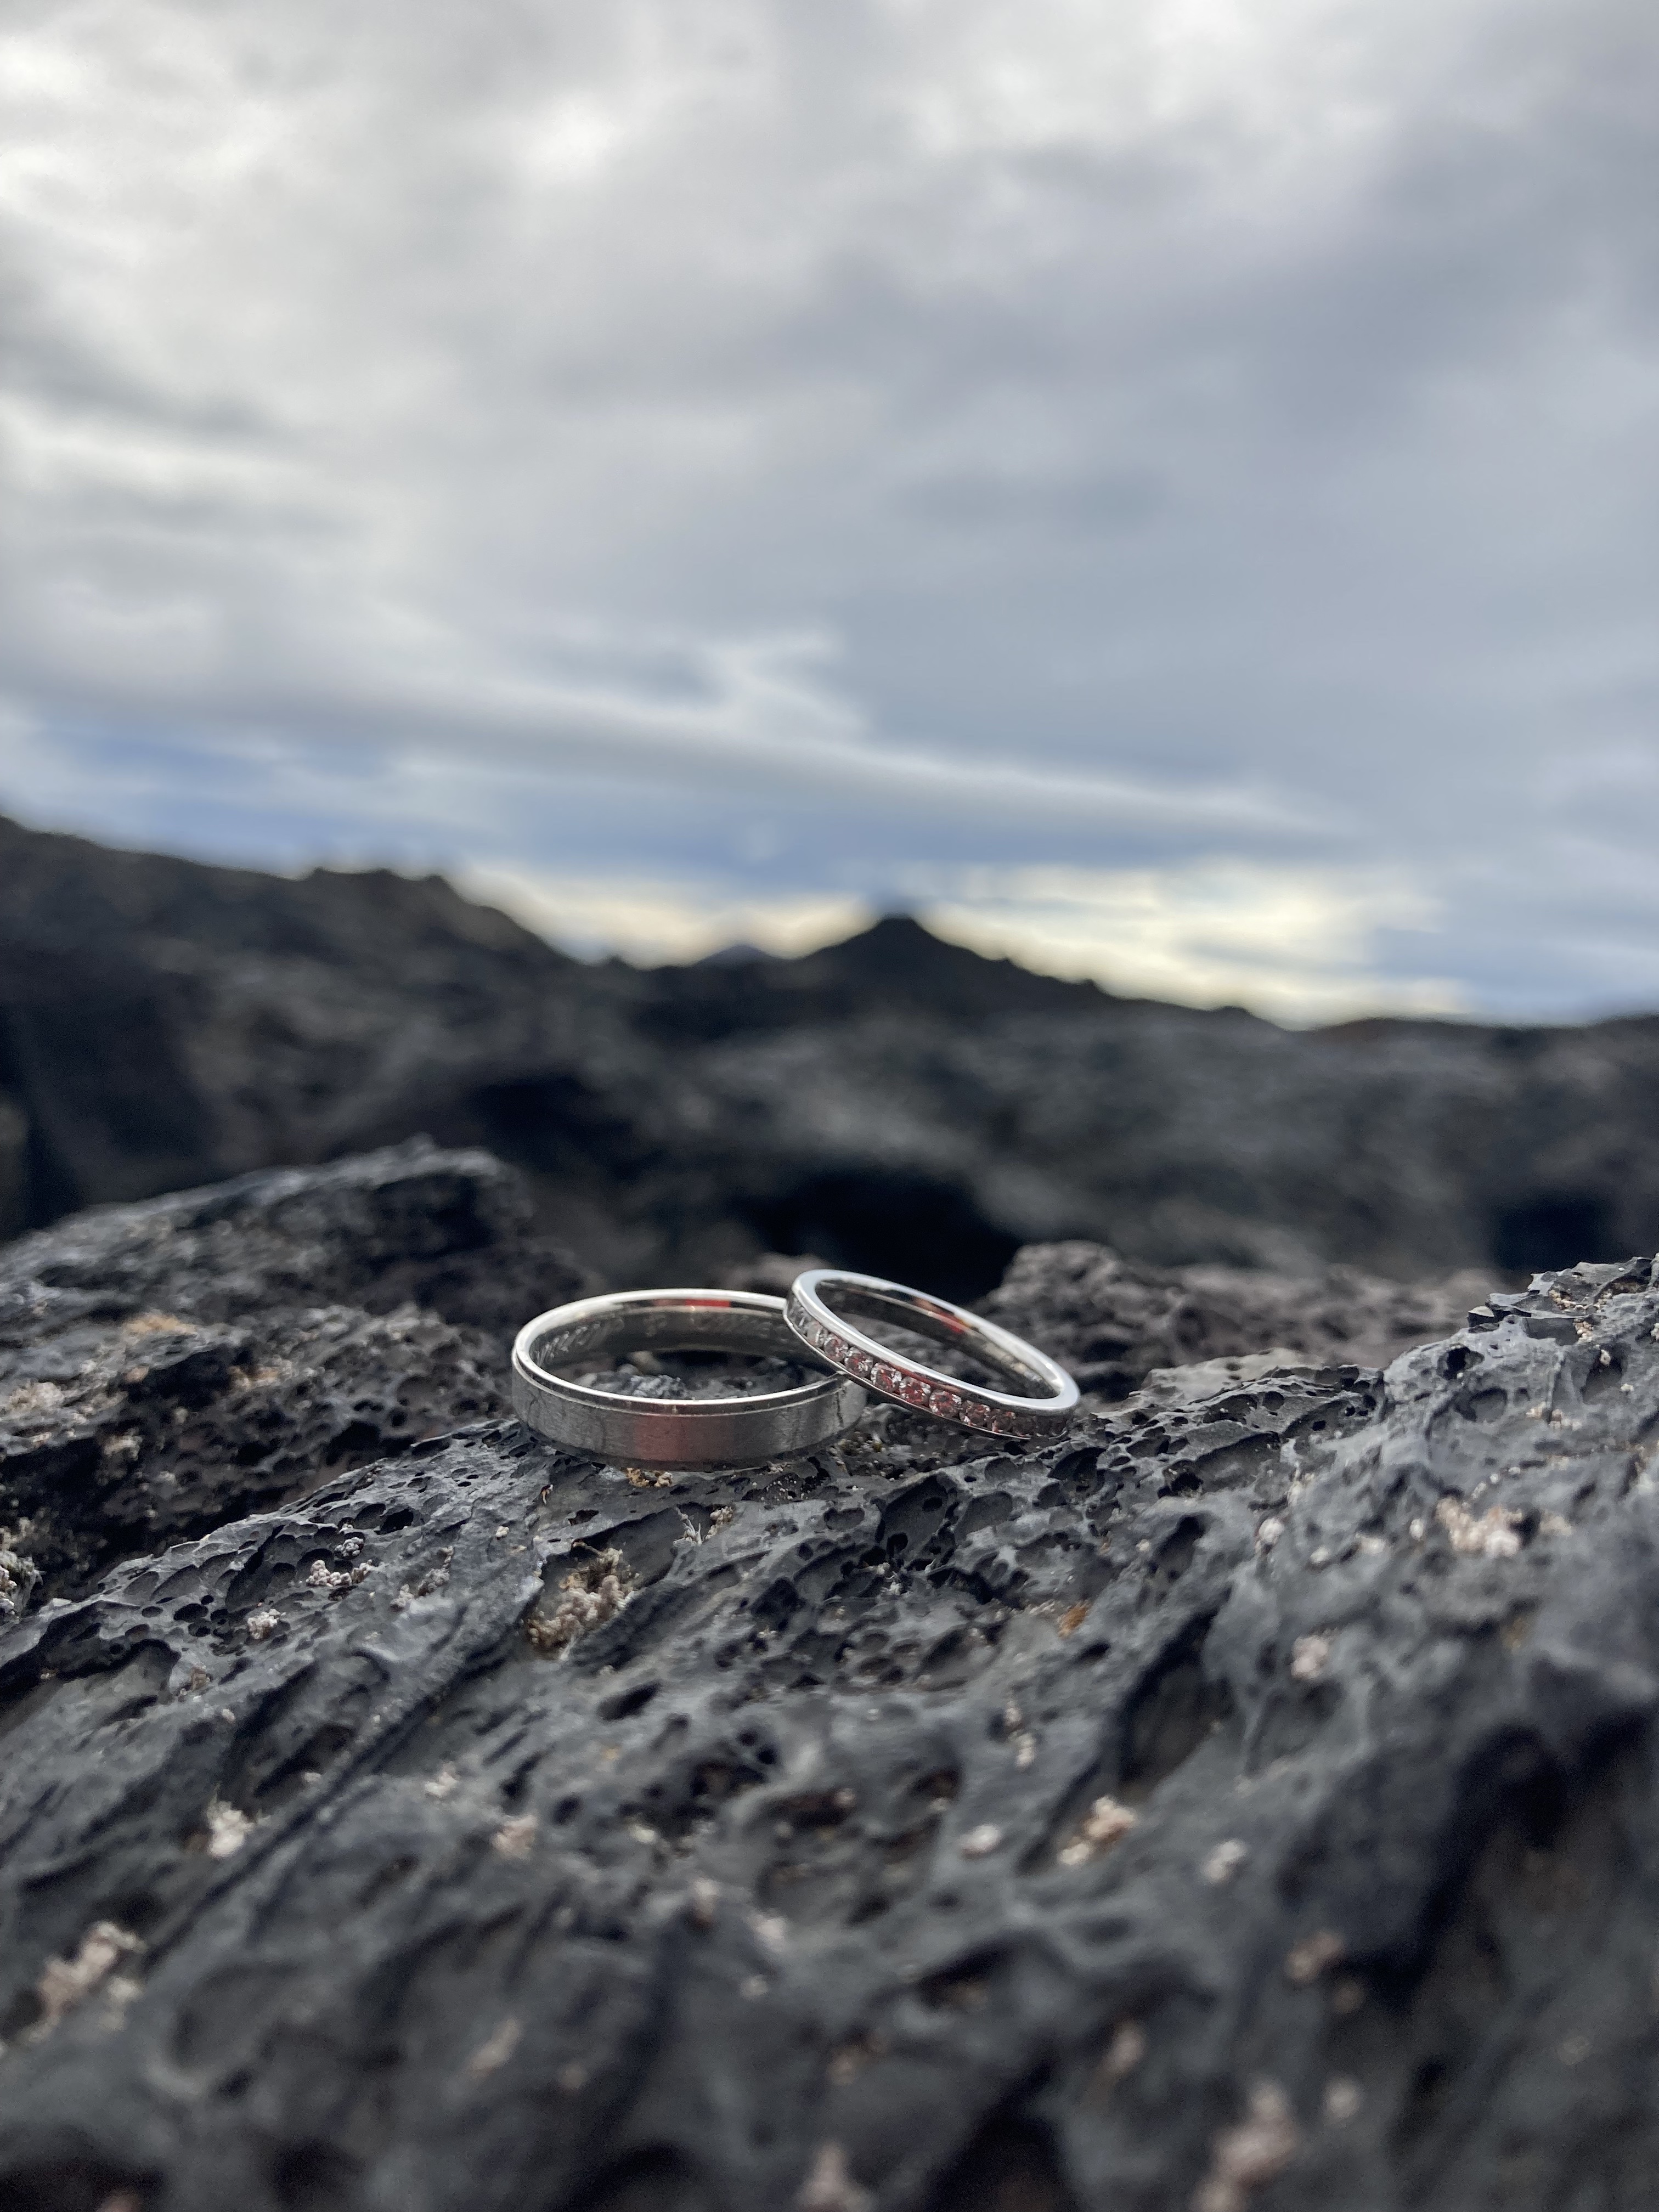 Two rings on a rock in Iceland showing a black mountain in the background